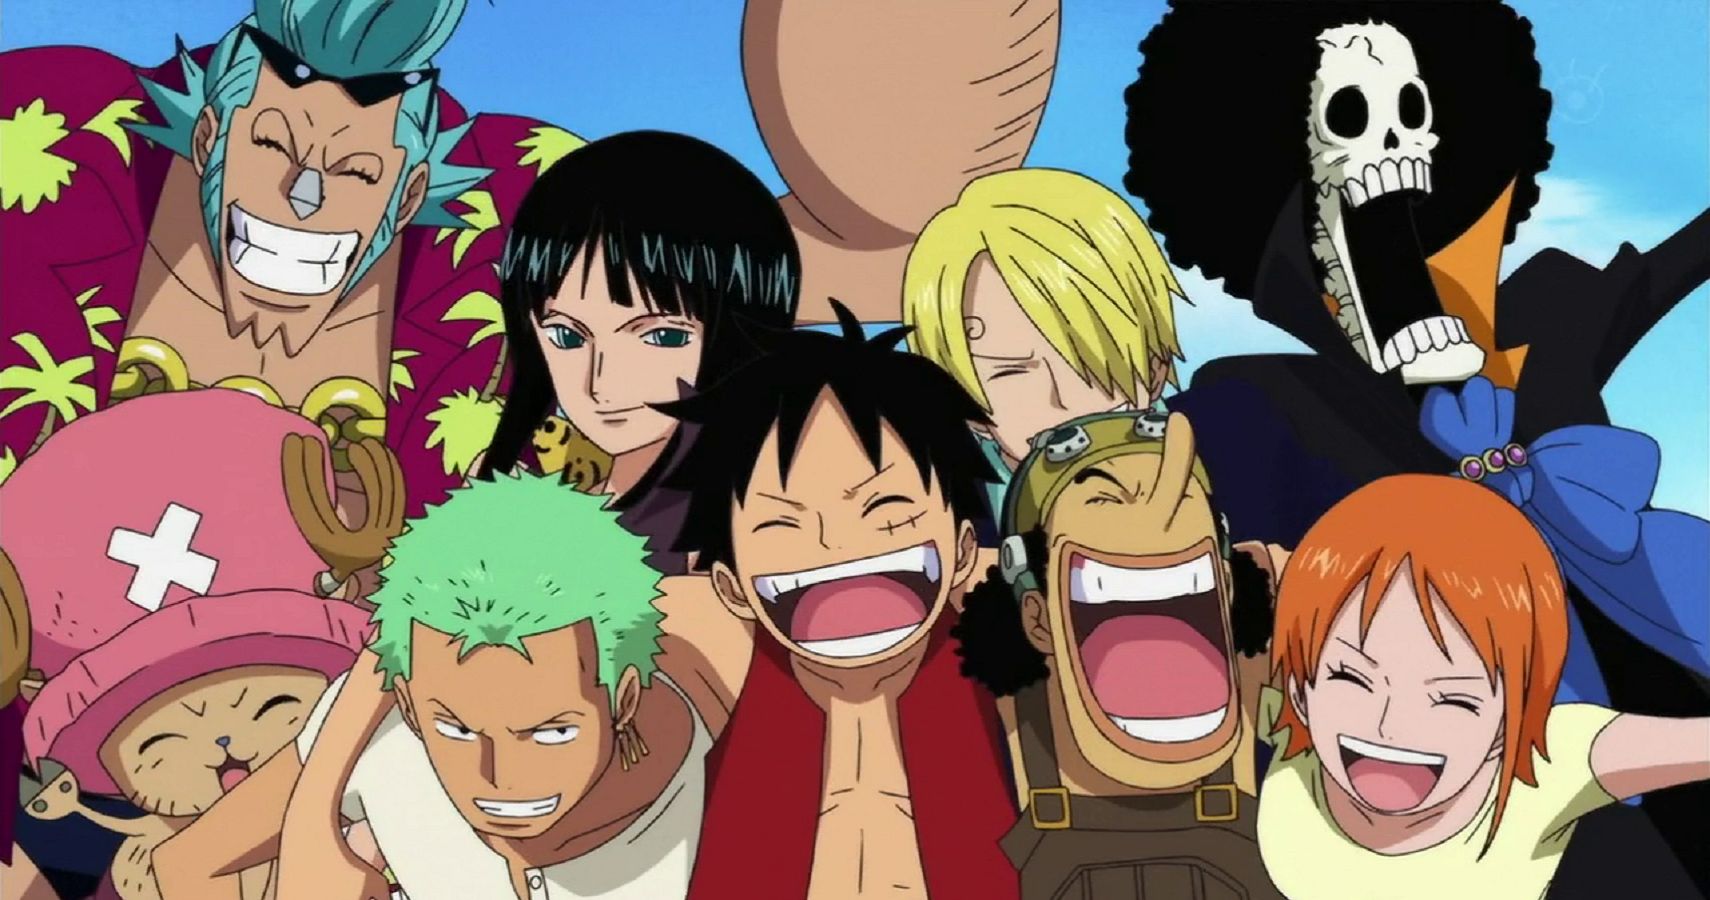 Characters from the anime One Piece